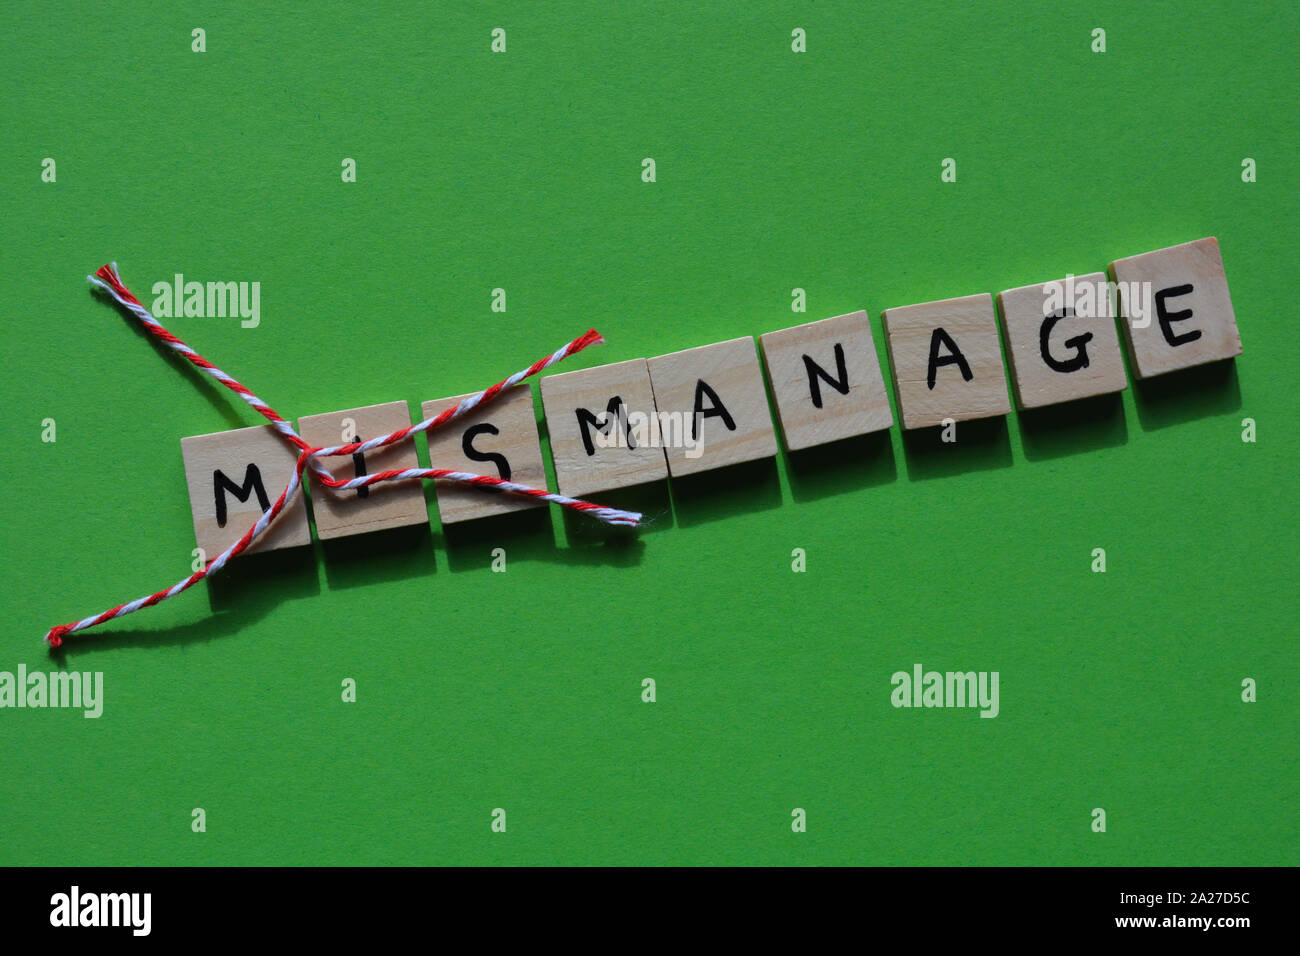 MisManage in 3d Wooden letters, with Mis crossed out, leaving the word Manage. Bright green background. Stock Photo